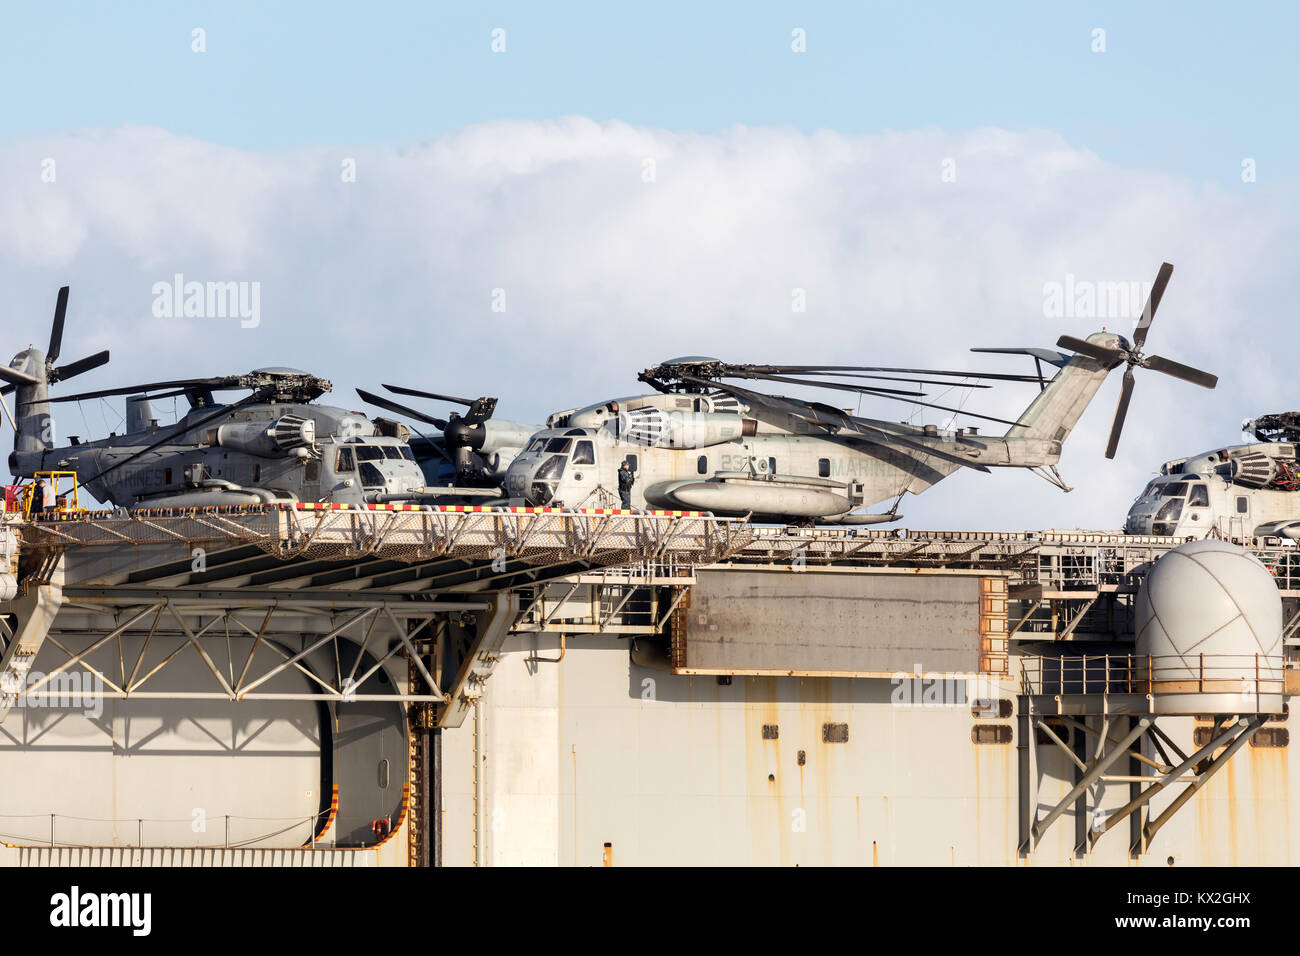 Sikorsky CH-53 Heavy lift Transporthubschrauber aus dem United States Marine Corps (Marine Expeditionary Unit Stockfoto